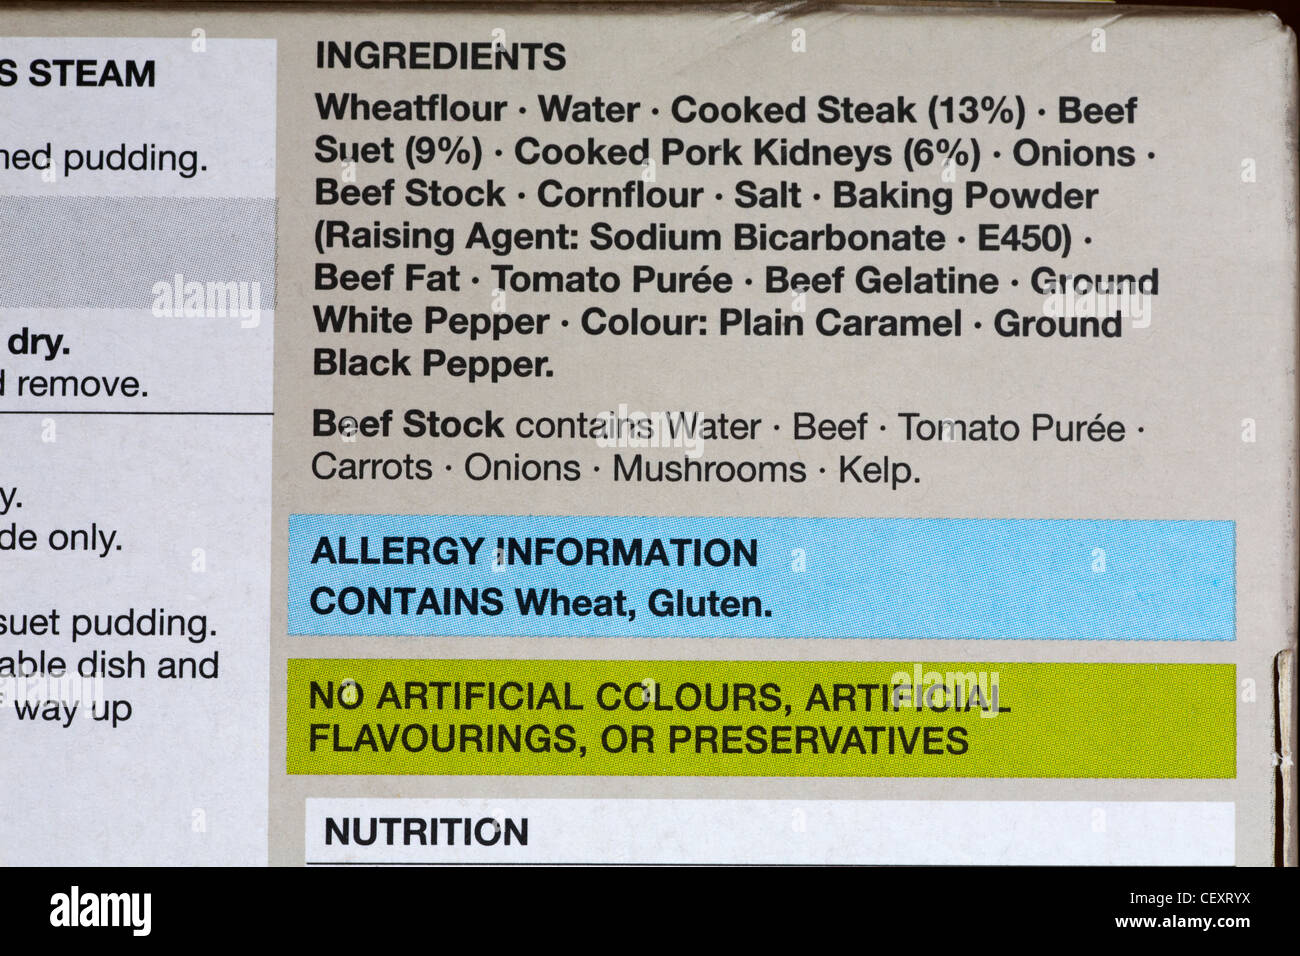 Ingredients and allergy information on box of steak and kidney pudding box Stock Photo